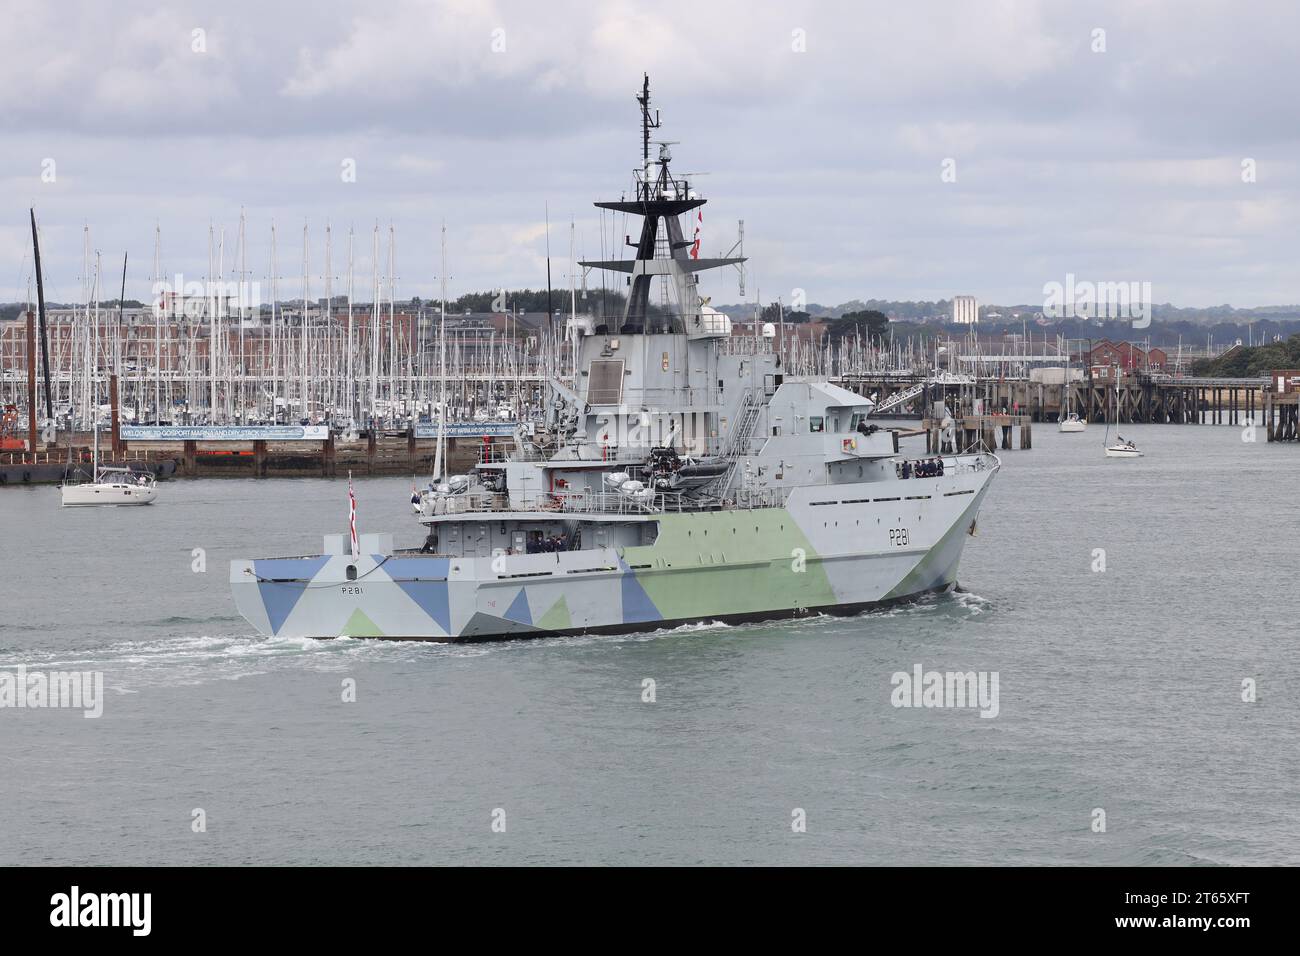 The Royal Navy River class offshore patrol vessel HMS TYNE (P281) heading towards a berth in the Naval Base Stock Photo